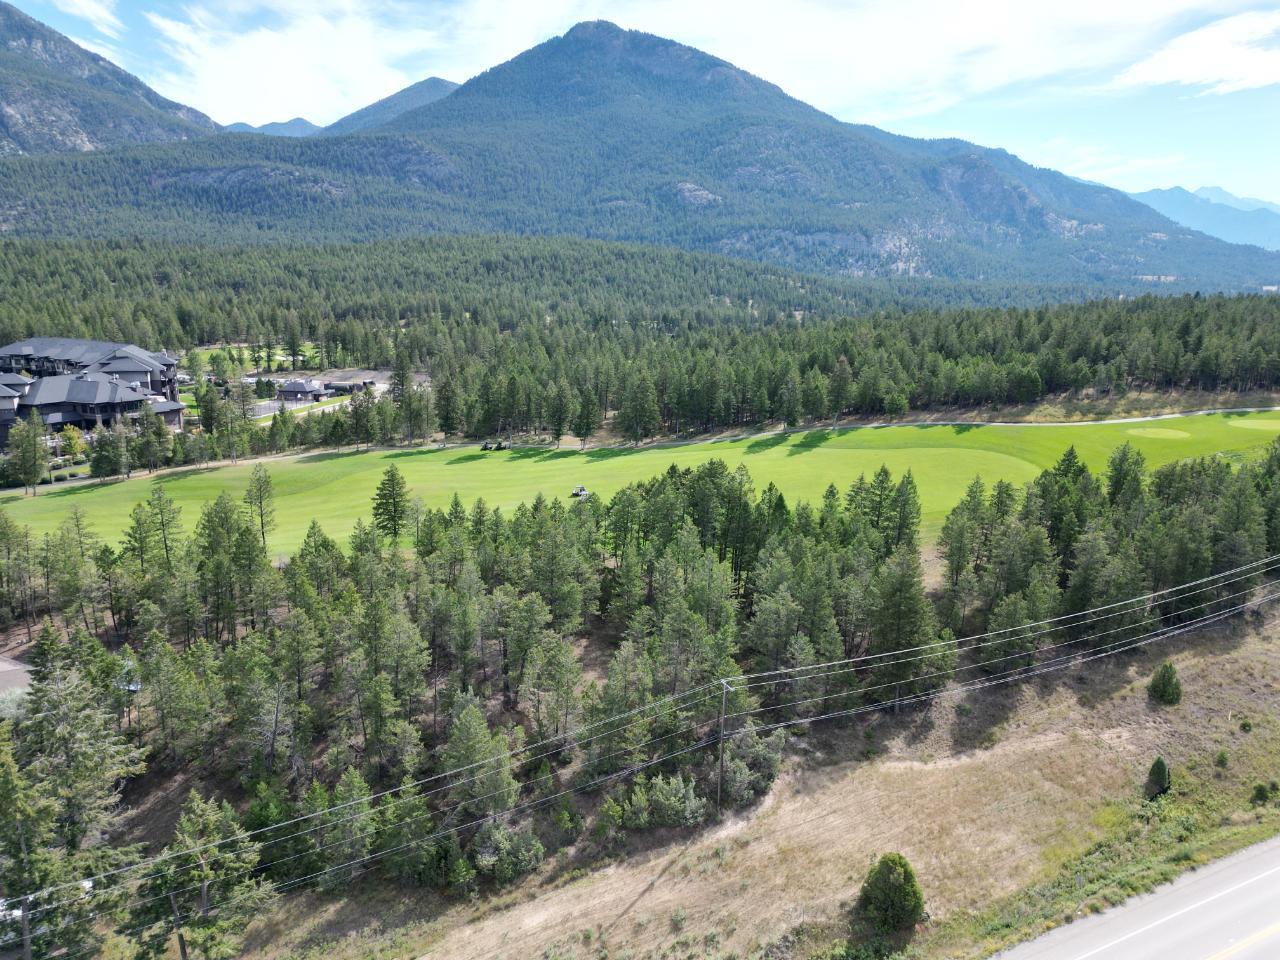 Lot 6 EMERALD EAST FRONTAGE ROAD located in Windermere, British Columbia